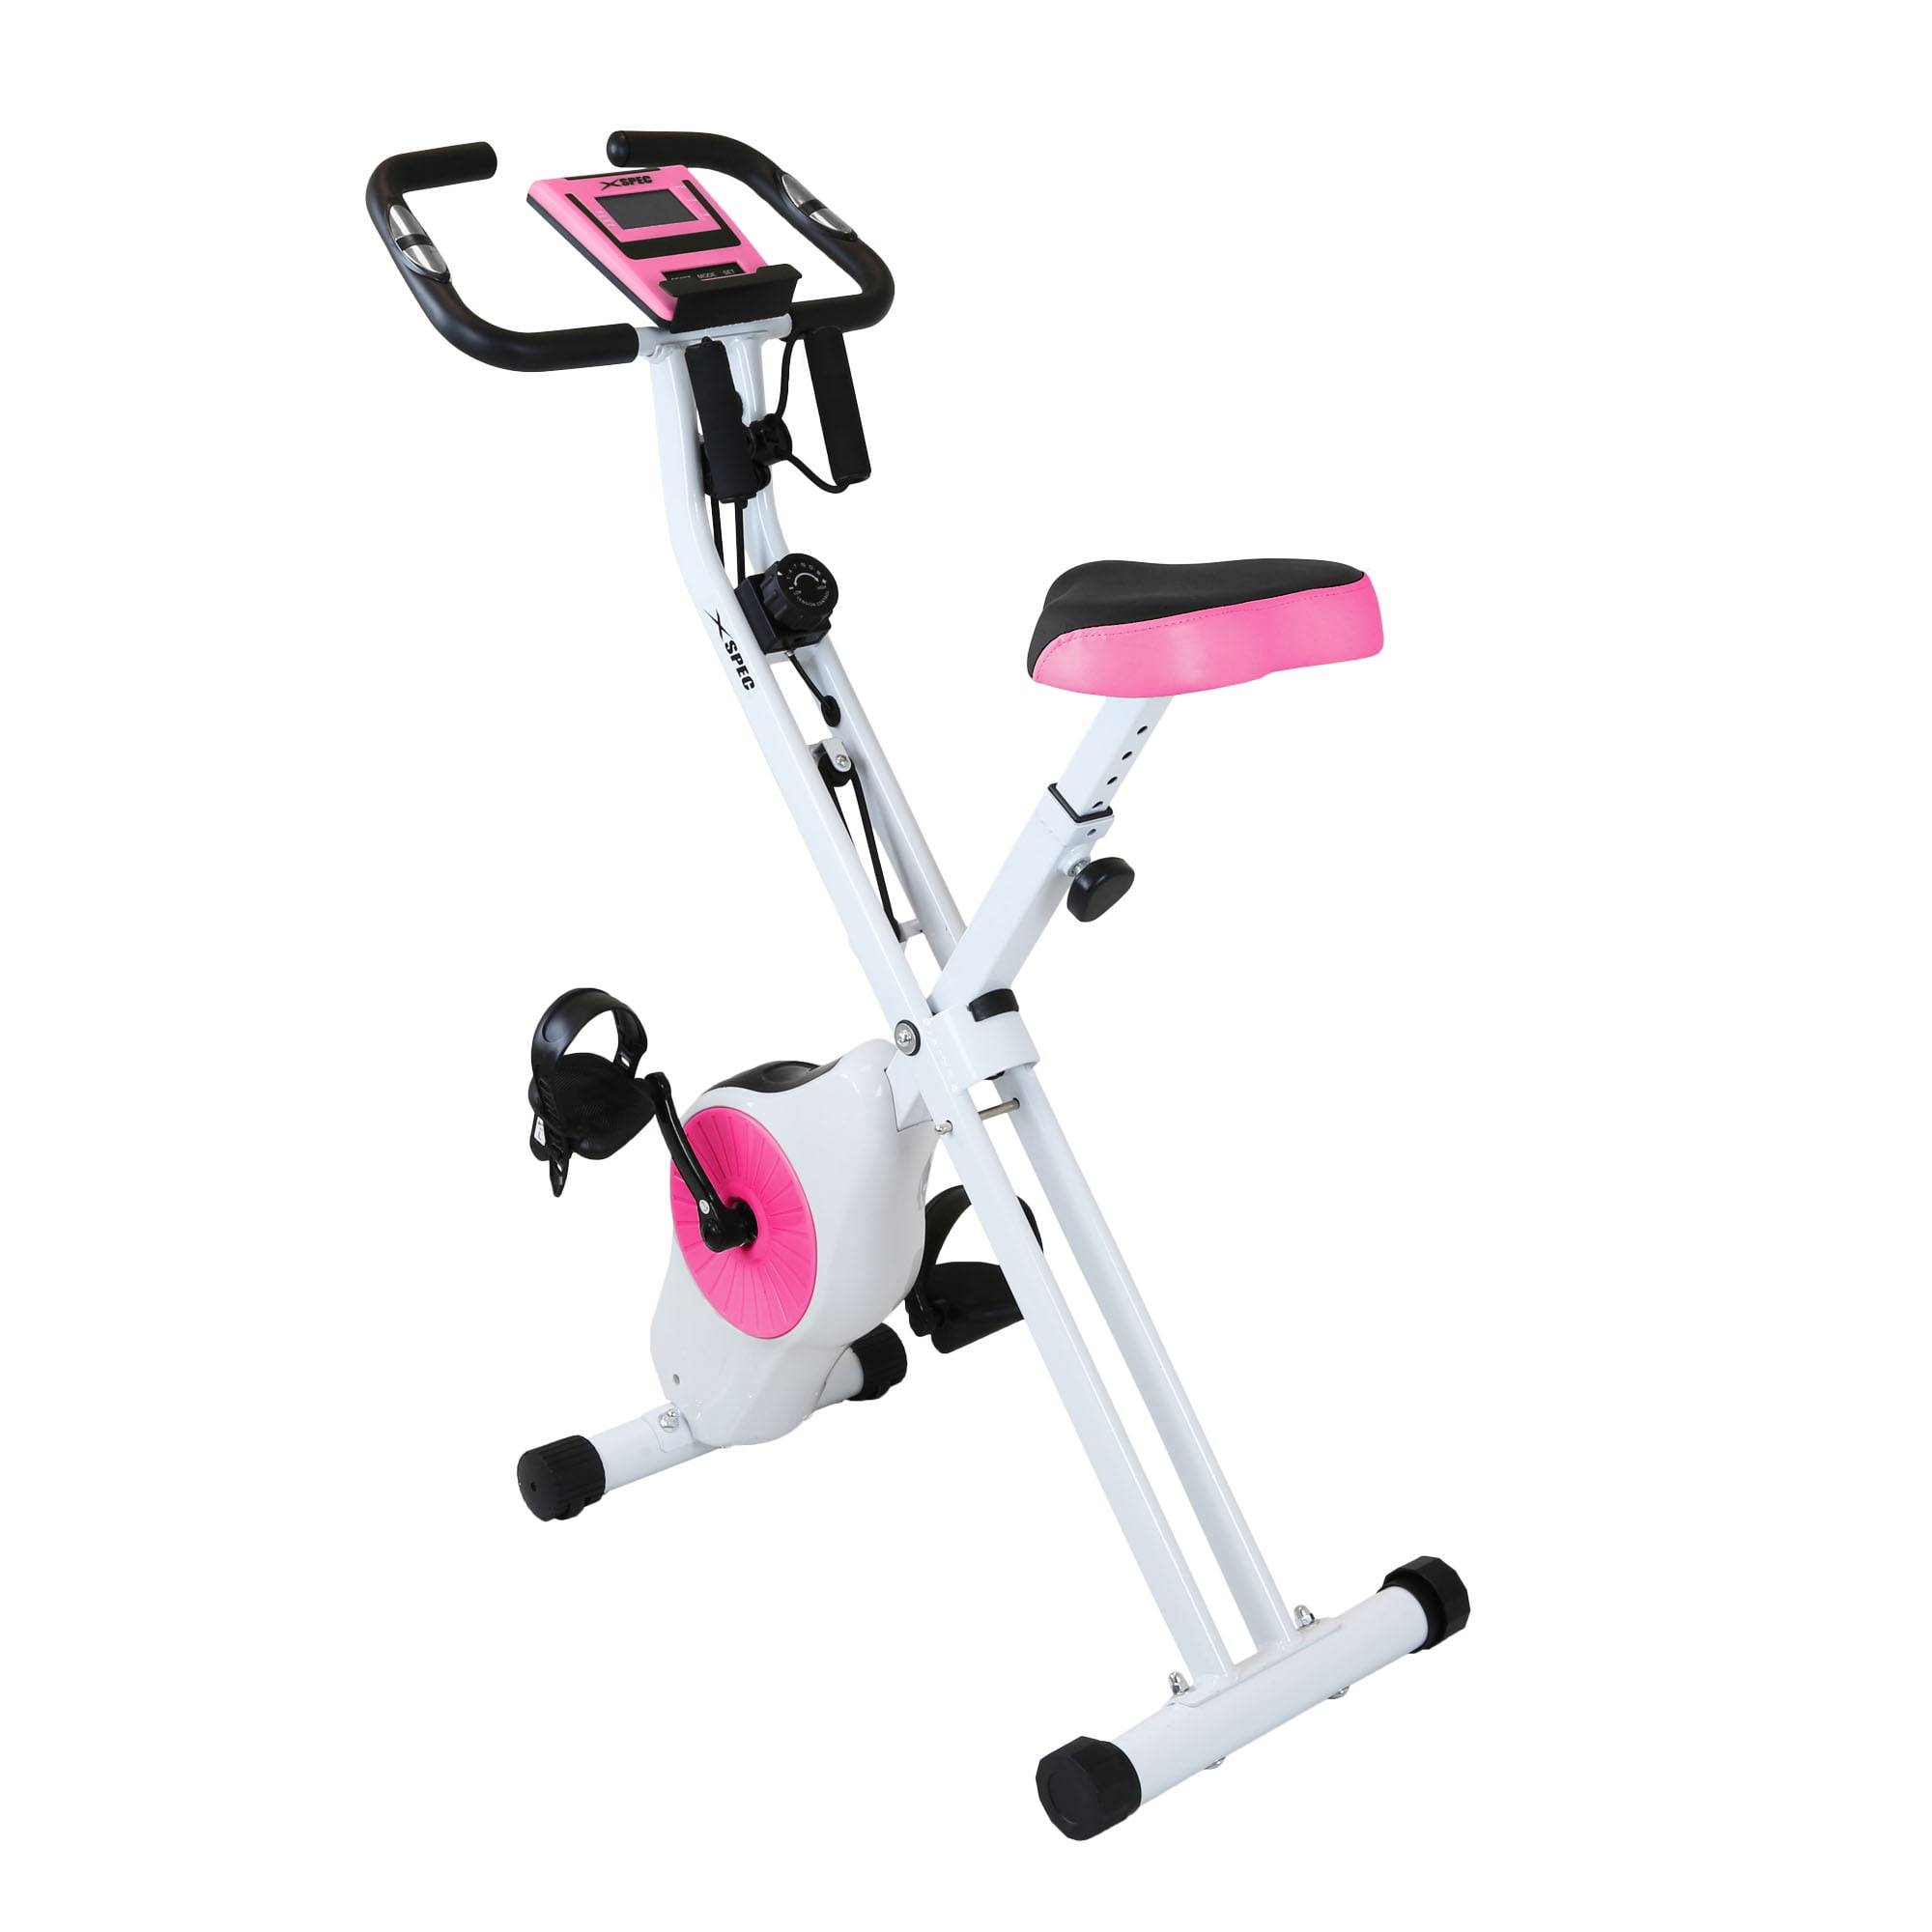 Gold Gym Cycle 300C Manual : Gold S Gym Cycle Trainer 310 Cheaper Than